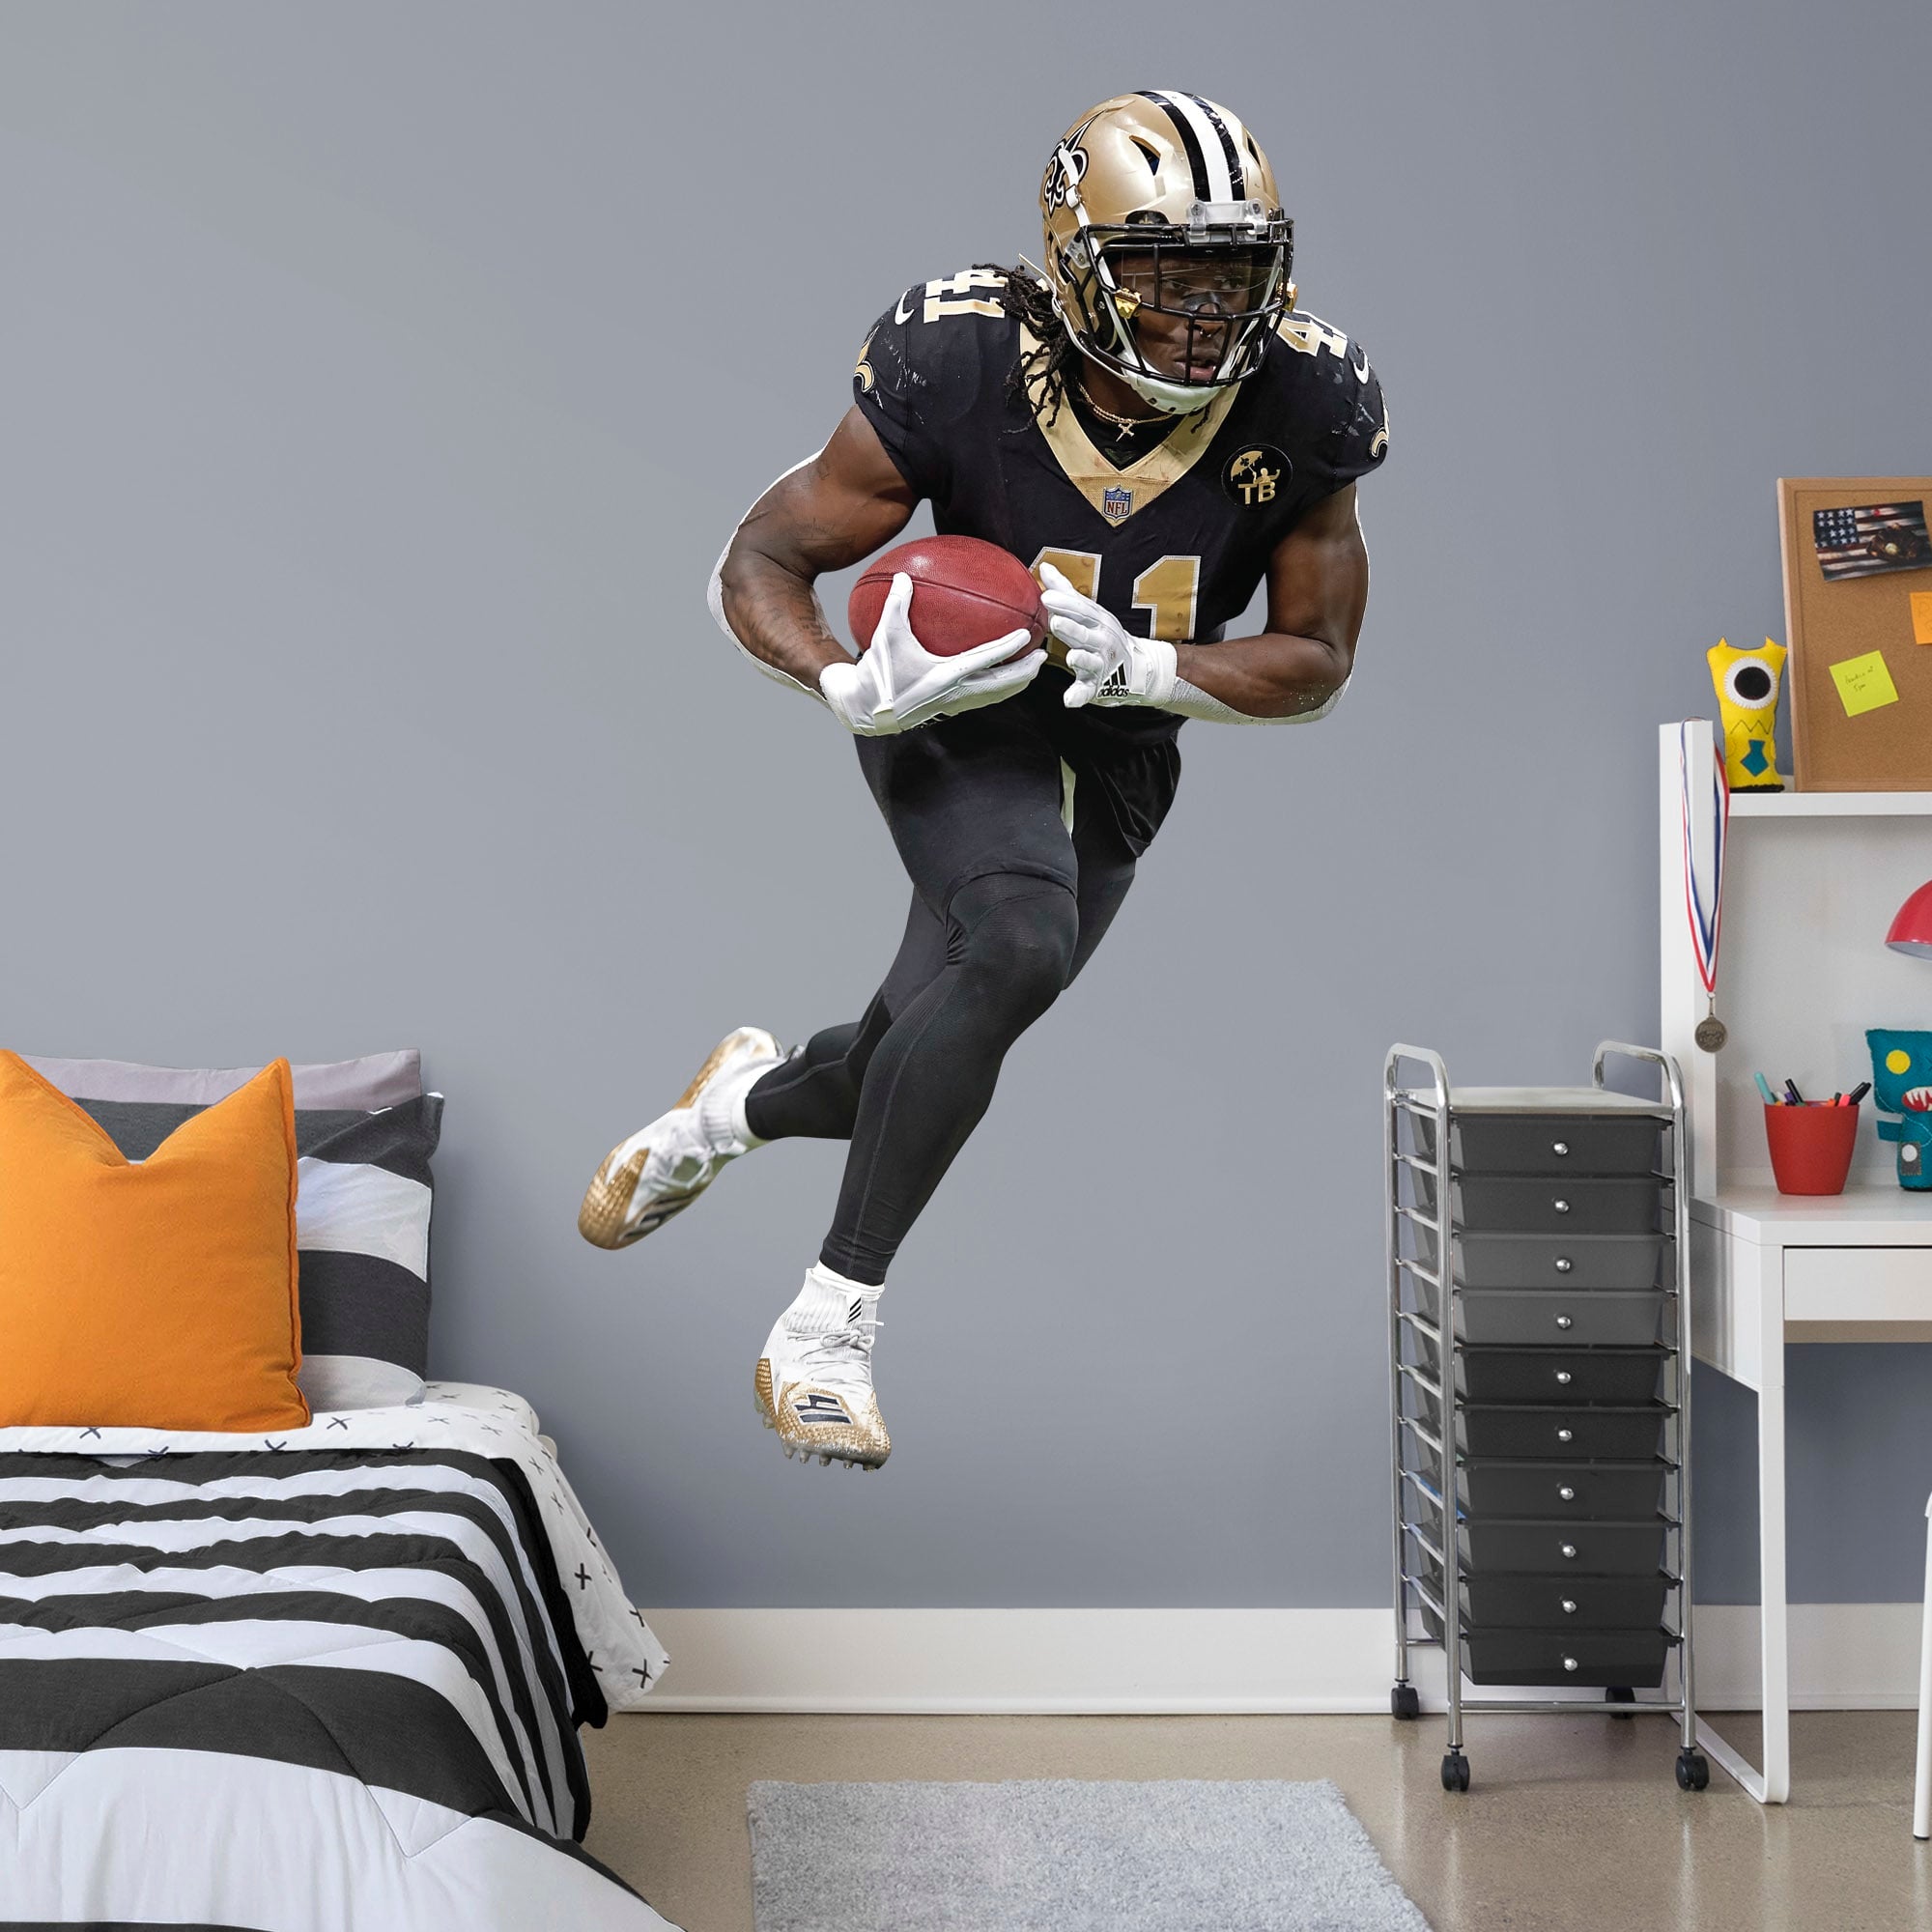 Alvin Kamara for New Orleans Saints - Officially Licensed NFL Removable Wall Decal Life-Size Athlete + 2 Decals (43"W x 74"H) by